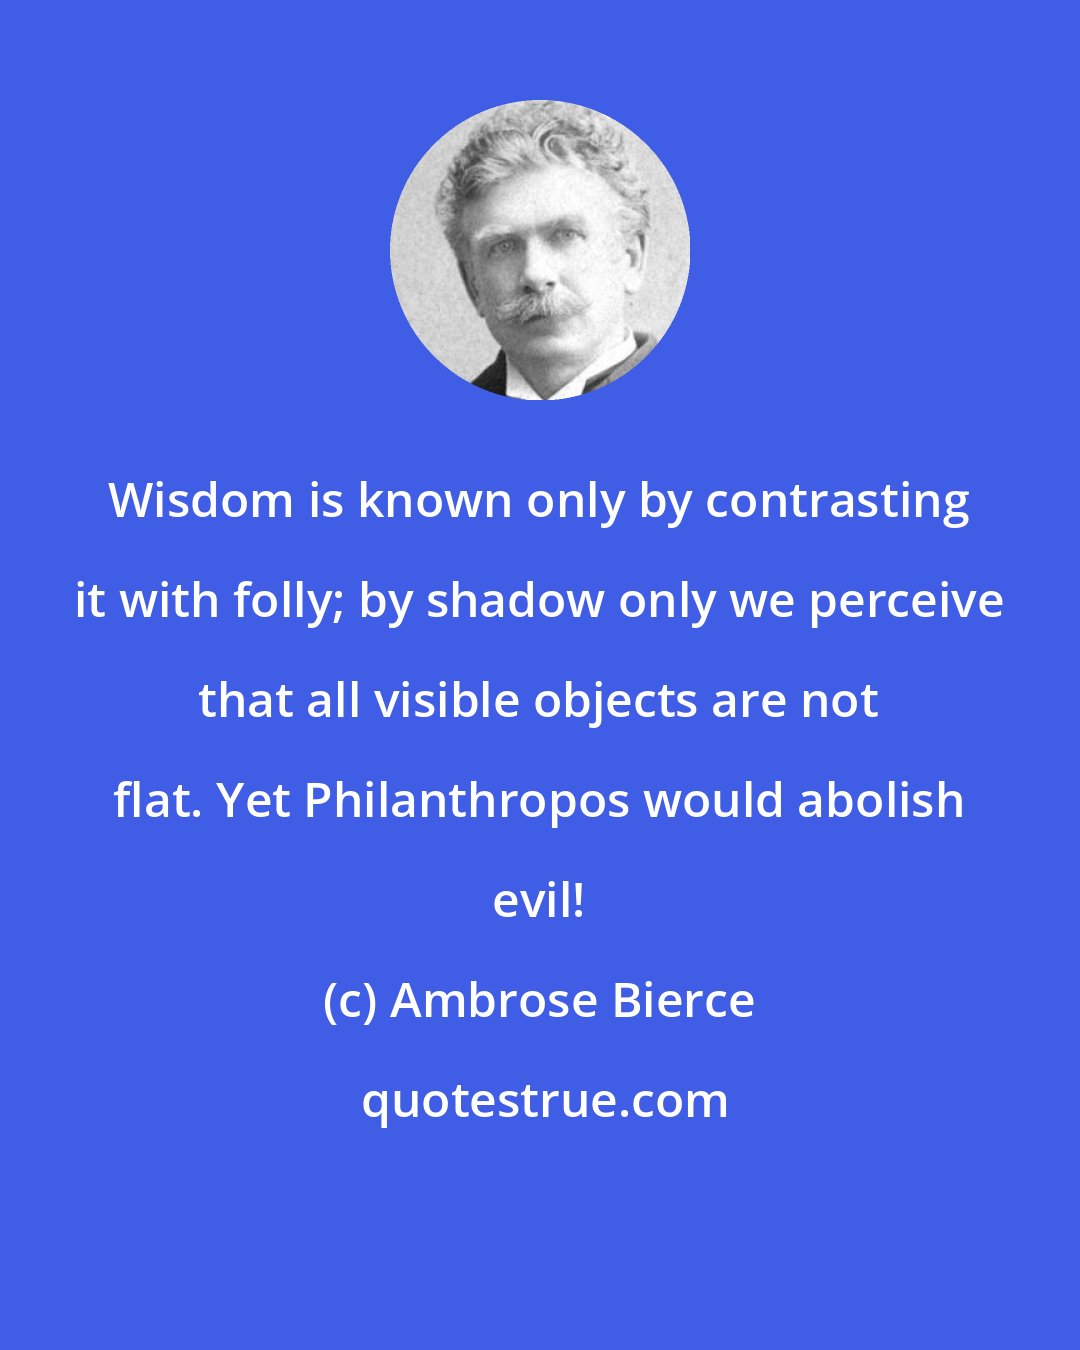 Ambrose Bierce: Wisdom is known only by contrasting it with folly; by shadow only we perceive that all visible objects are not flat. Yet Philanthropos would abolish evil!